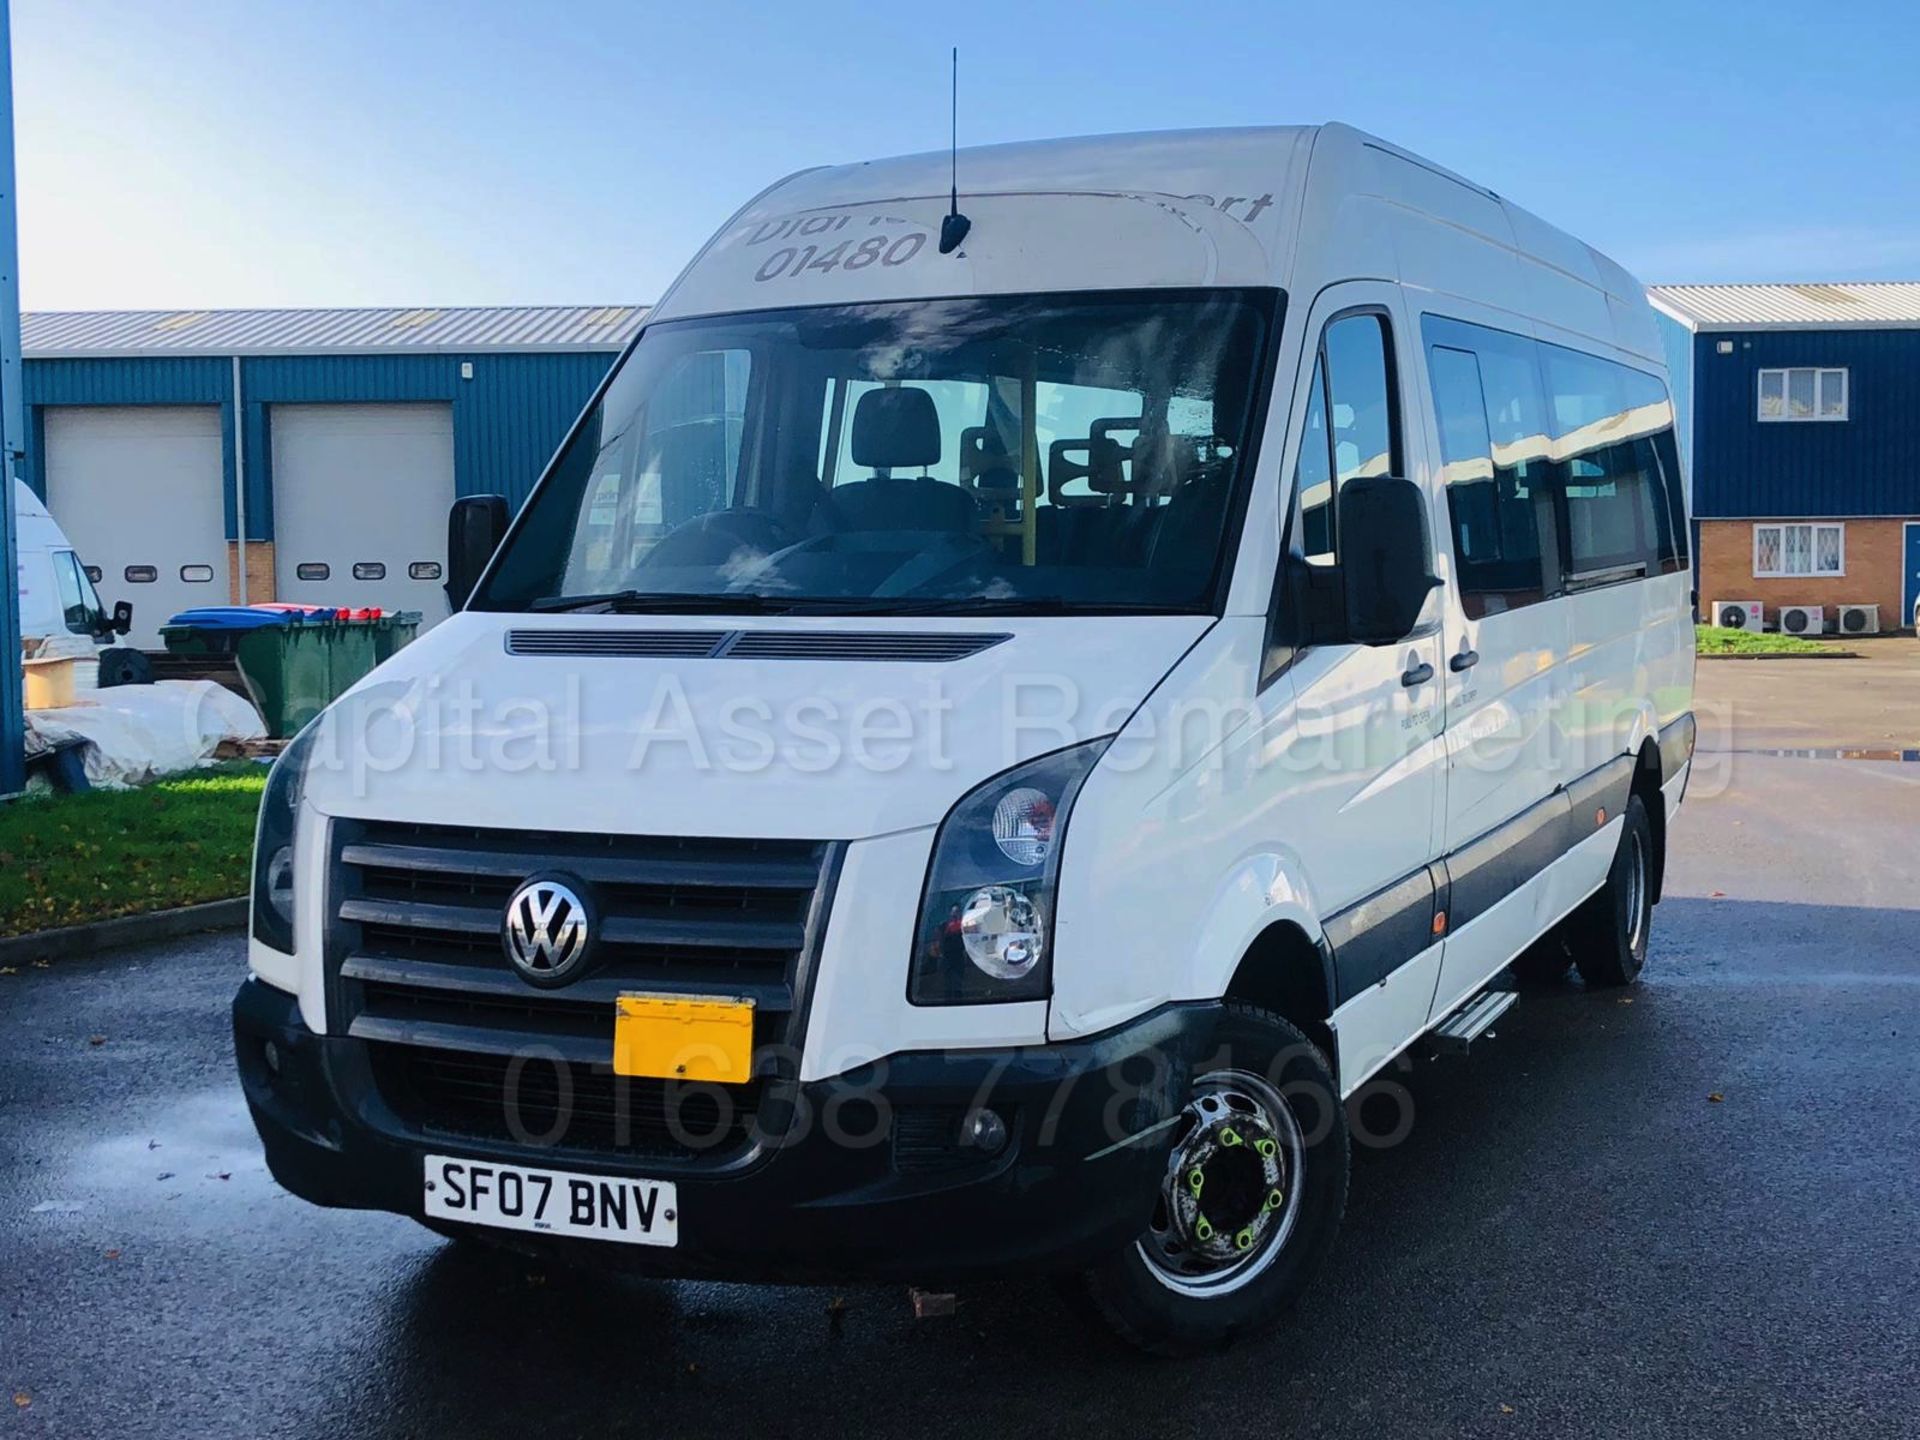 VOLKSWAGEN CRAFTER 2.5 TDI *LWB - 16 SEATER MINI-BUS / COACH* (2007) *ELECTRIC WHEEL CHAIR LIFT* - Image 8 of 38